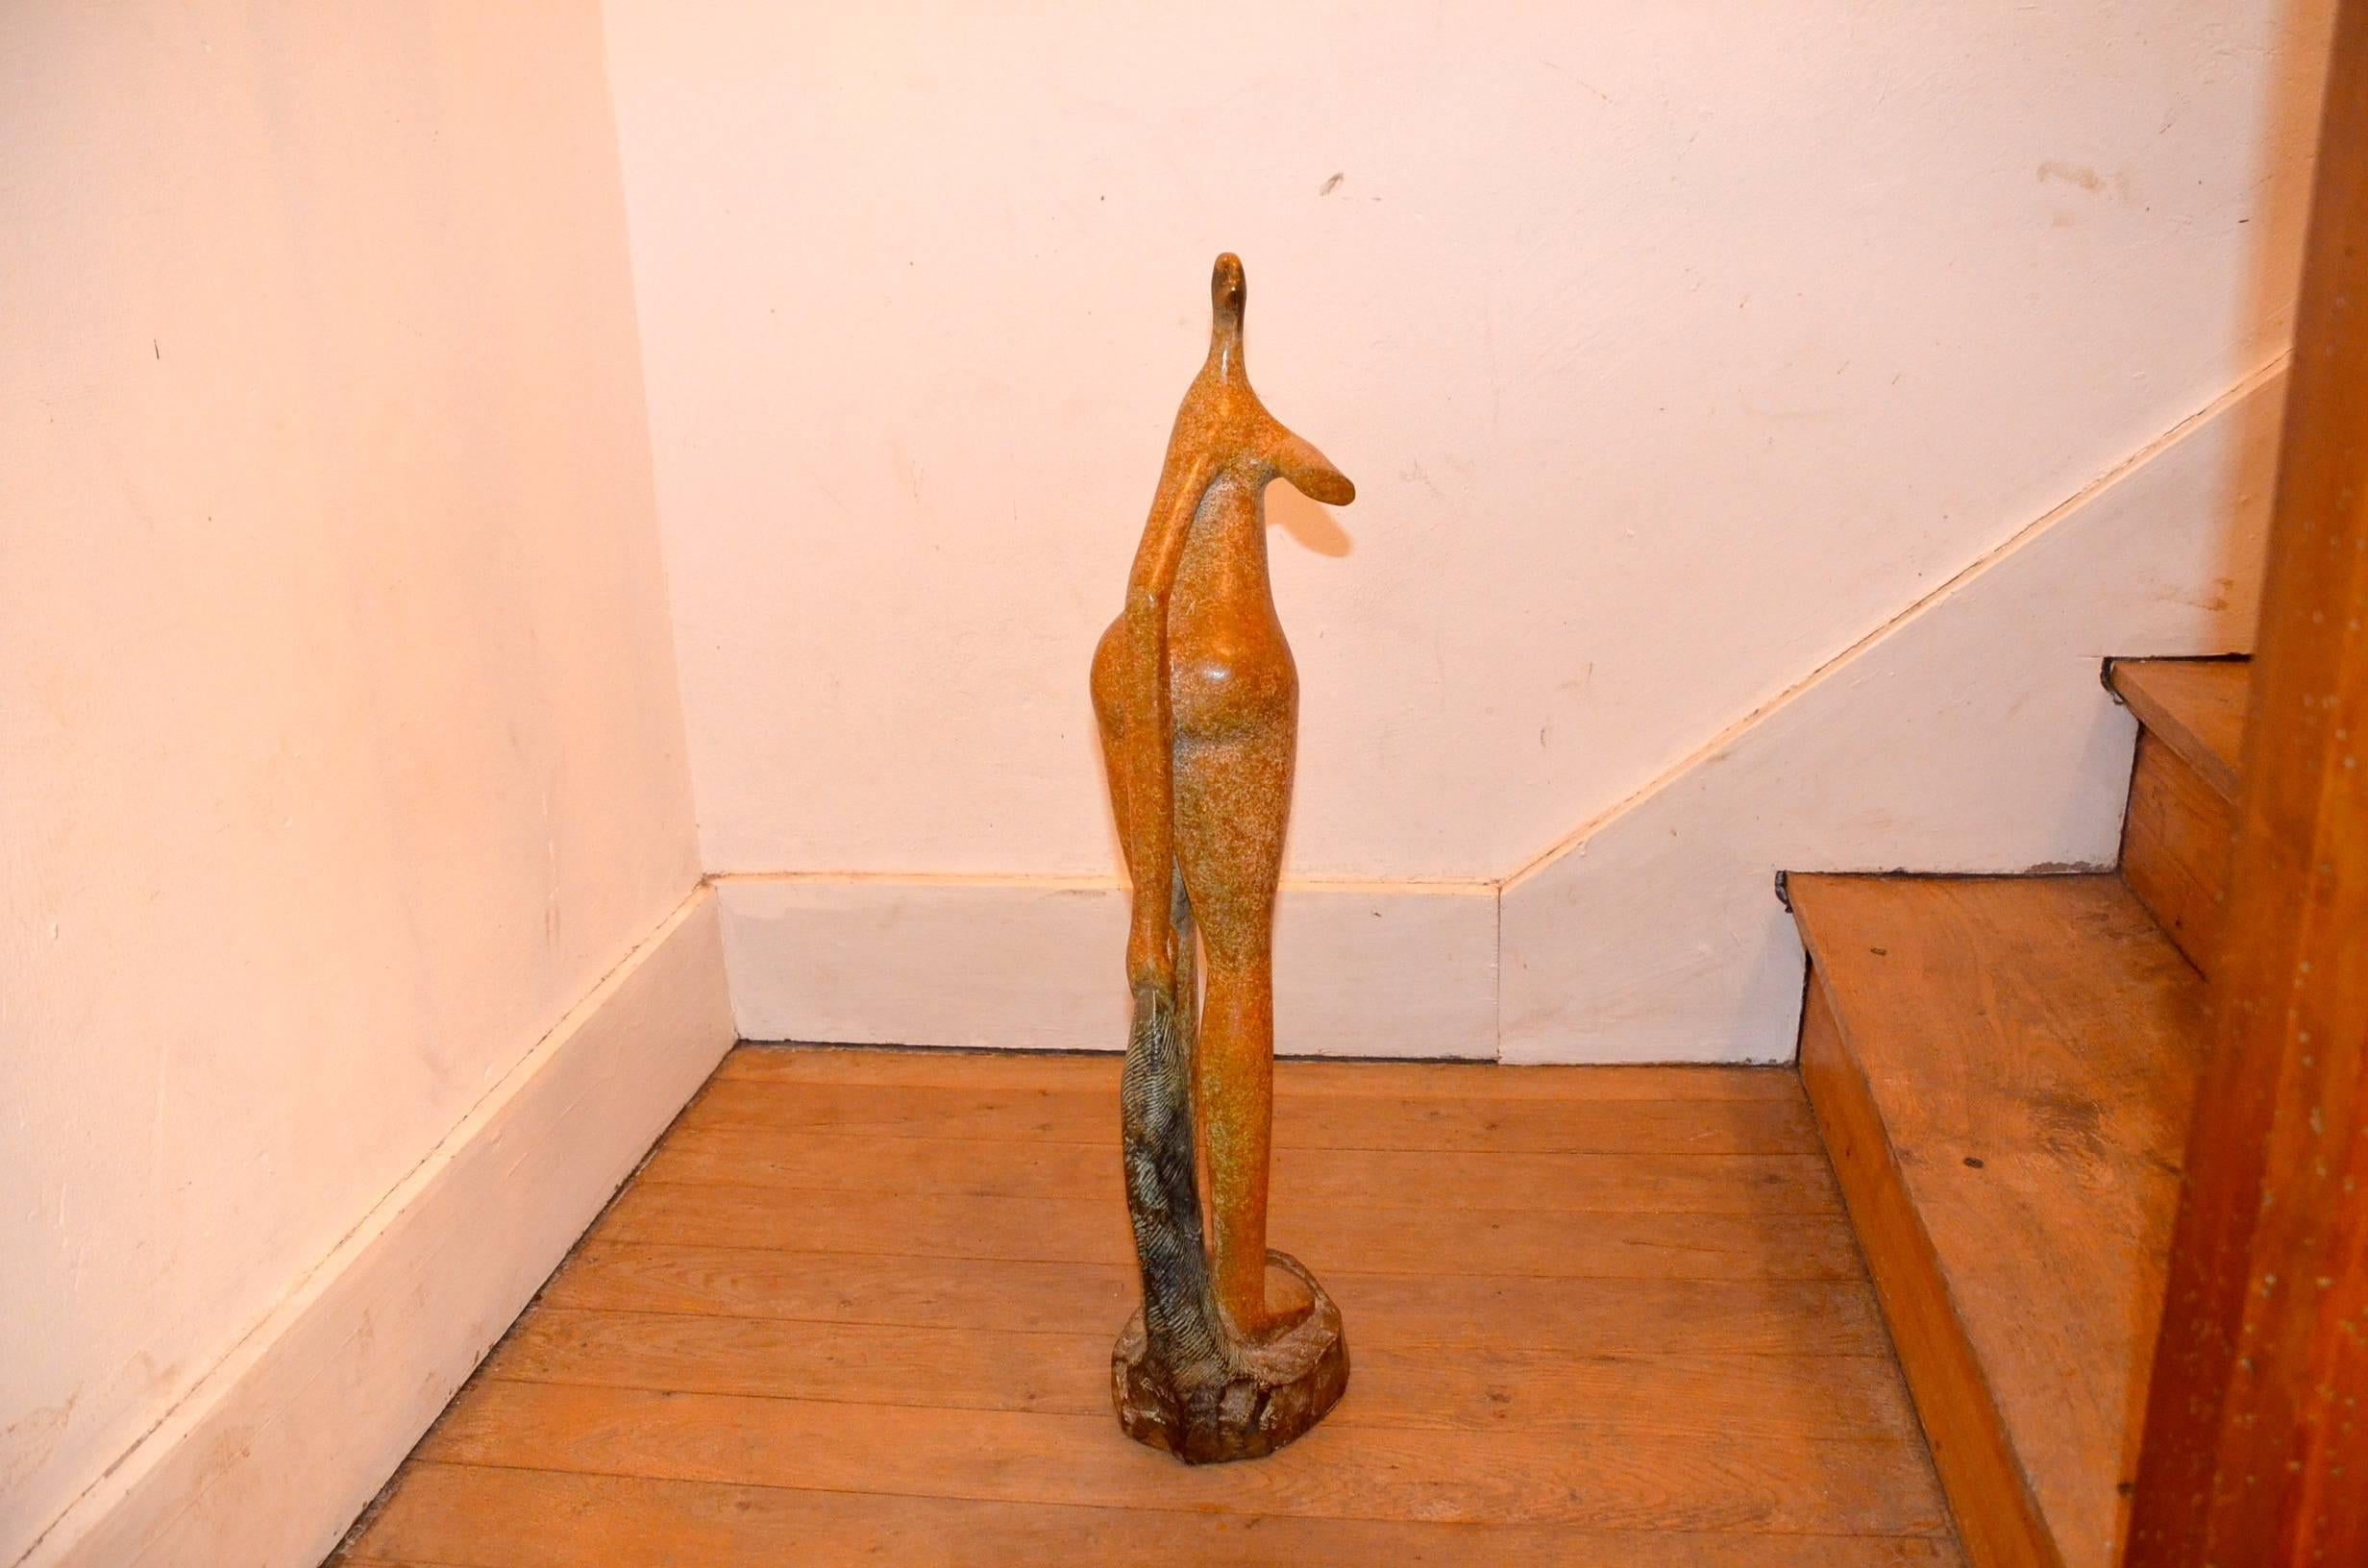 Superb bronze sculpture of a woman shape. Beautiful bronze. Three pieces have been made by the artist this is the 3/3.

Measures: Height 63 cm,
depth 16 cm,
width 22 cm.

Starting from the ’60 Paolo Ambrosio centered his research on the